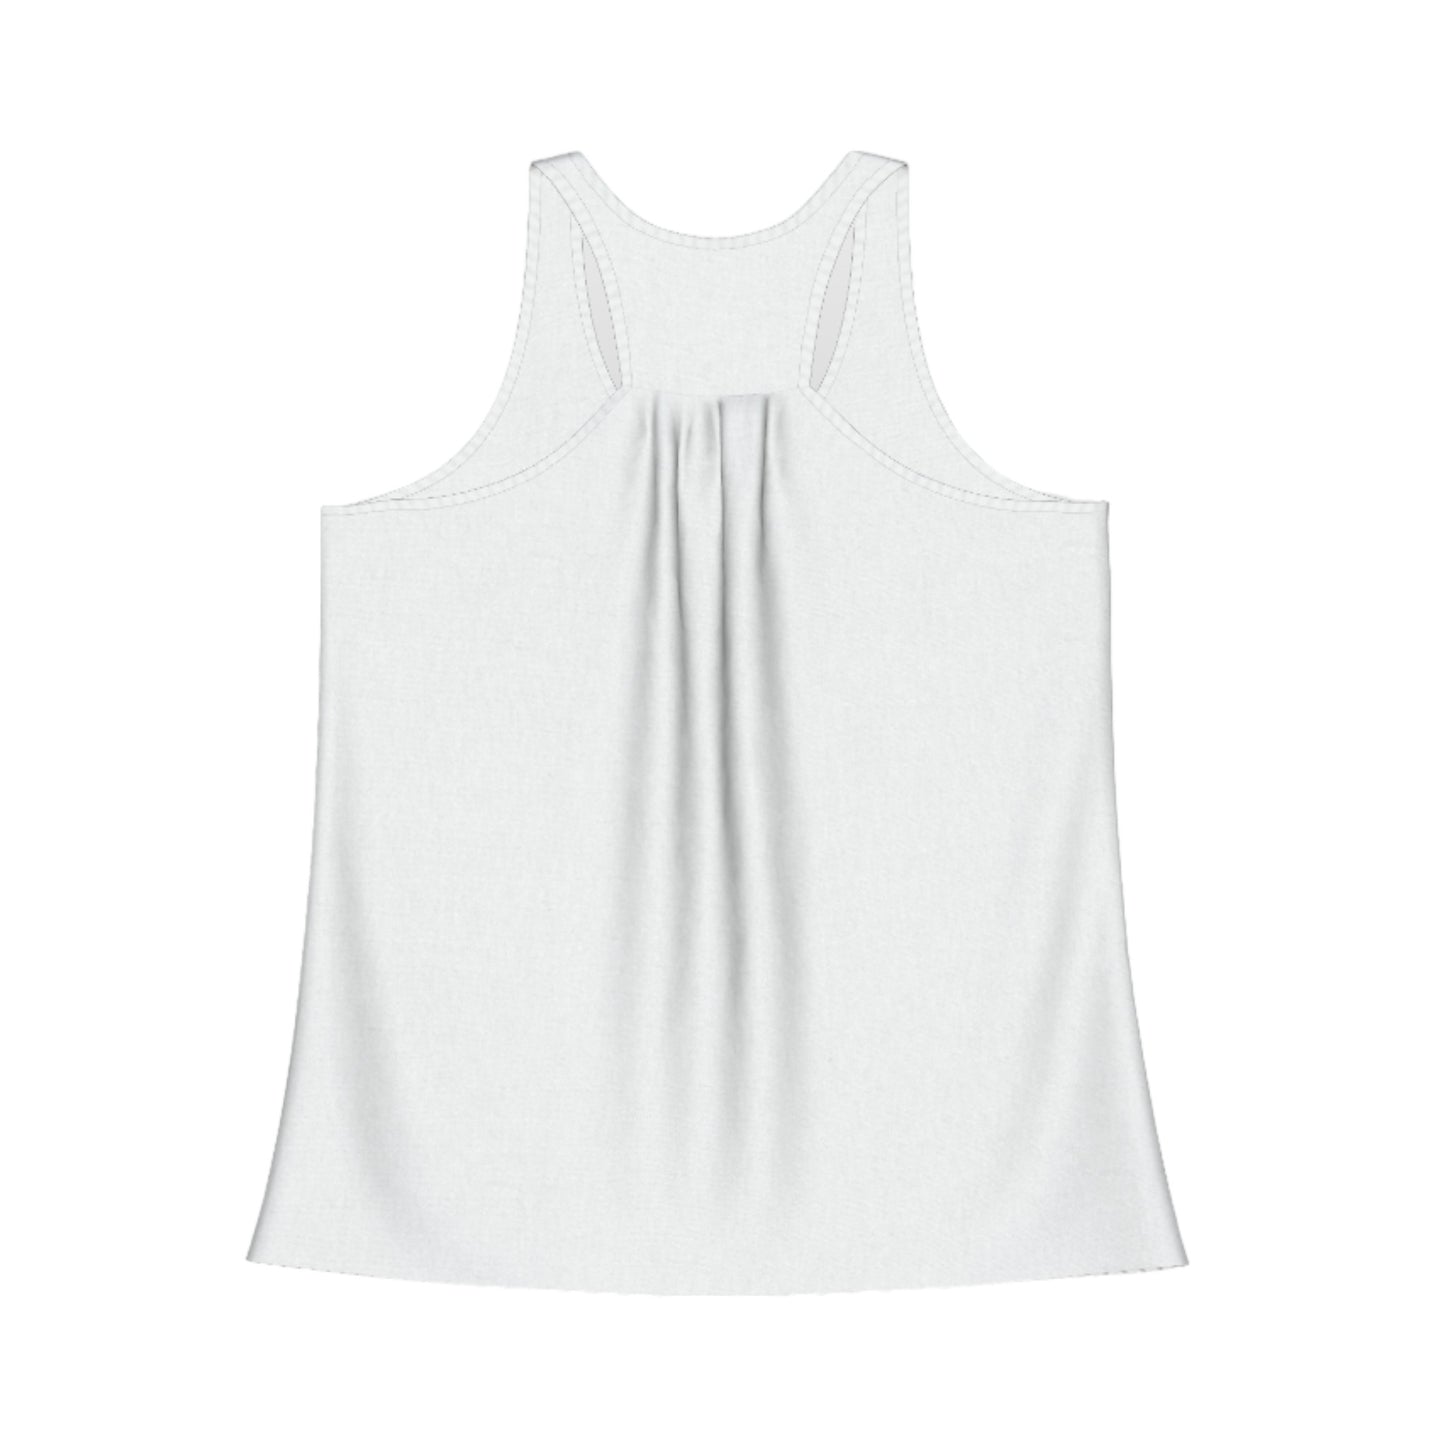 The back of the flow racerback tank top